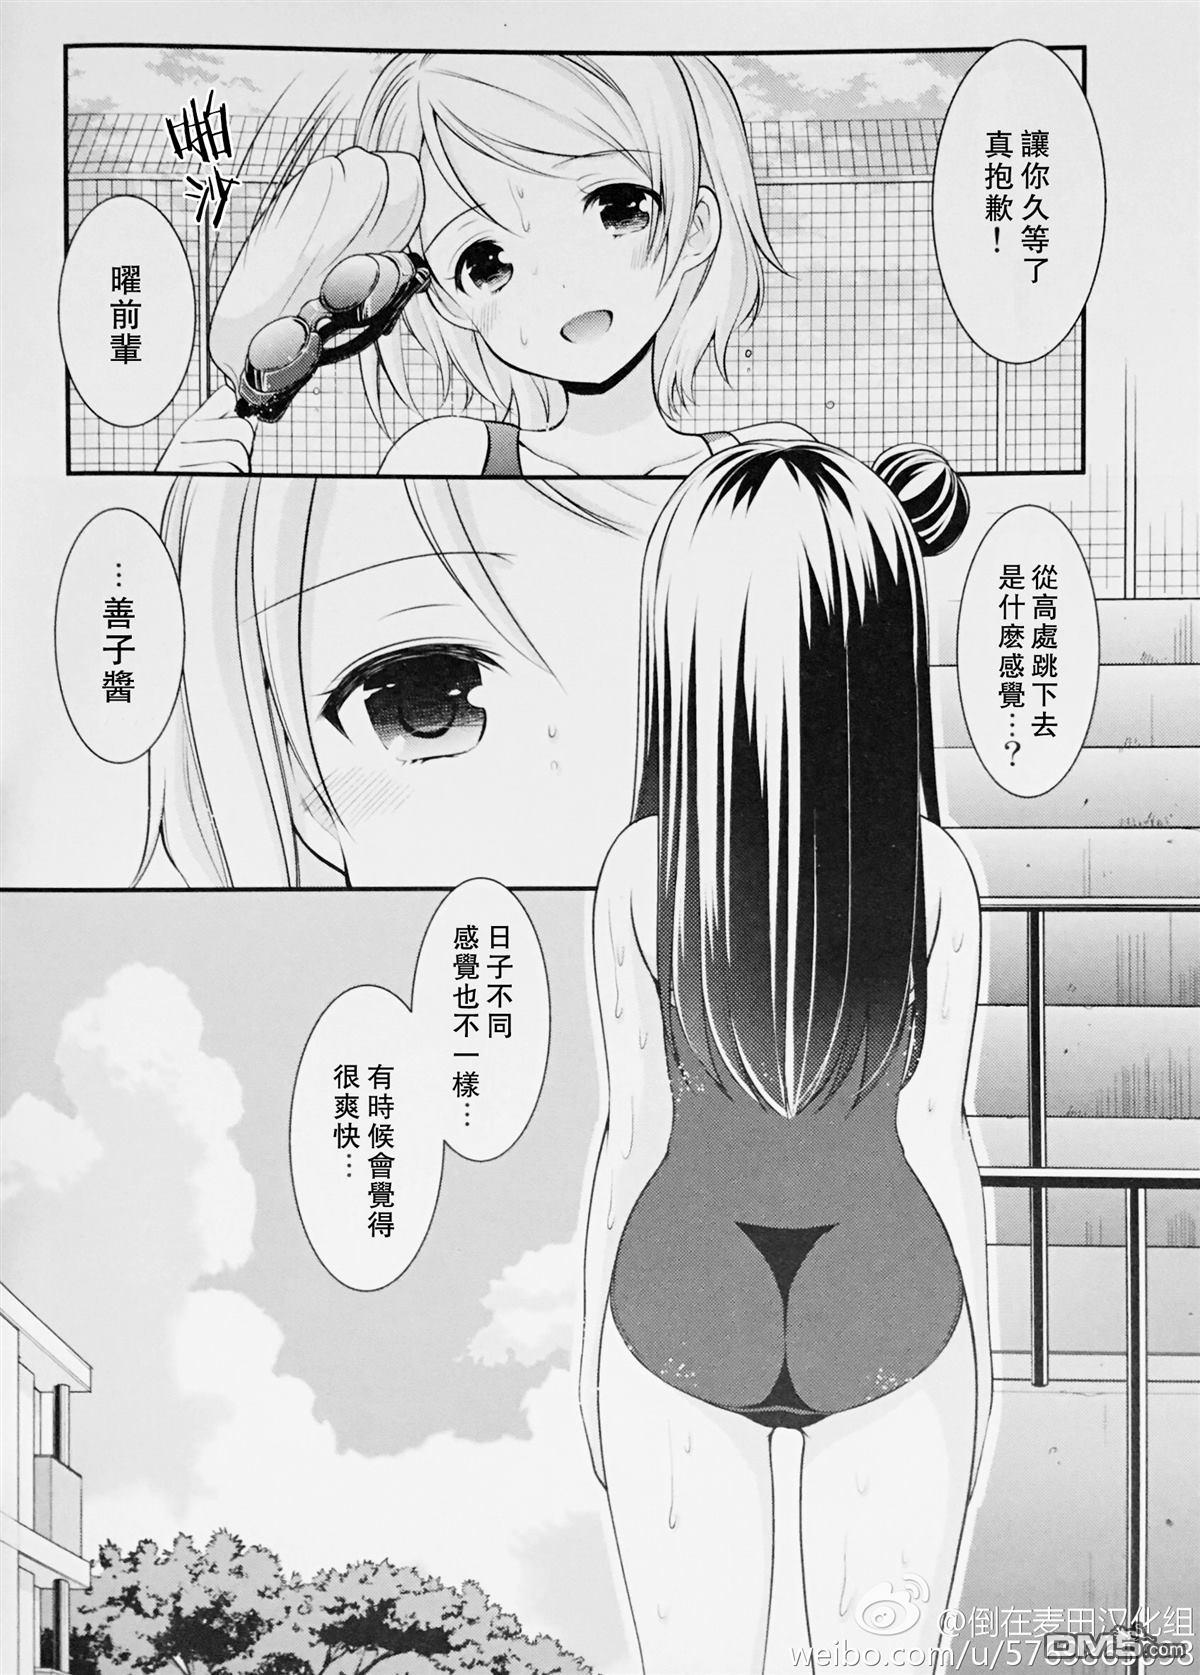 Peeing Lovely Little Devil - Love live sunshine Hairy - Page 7